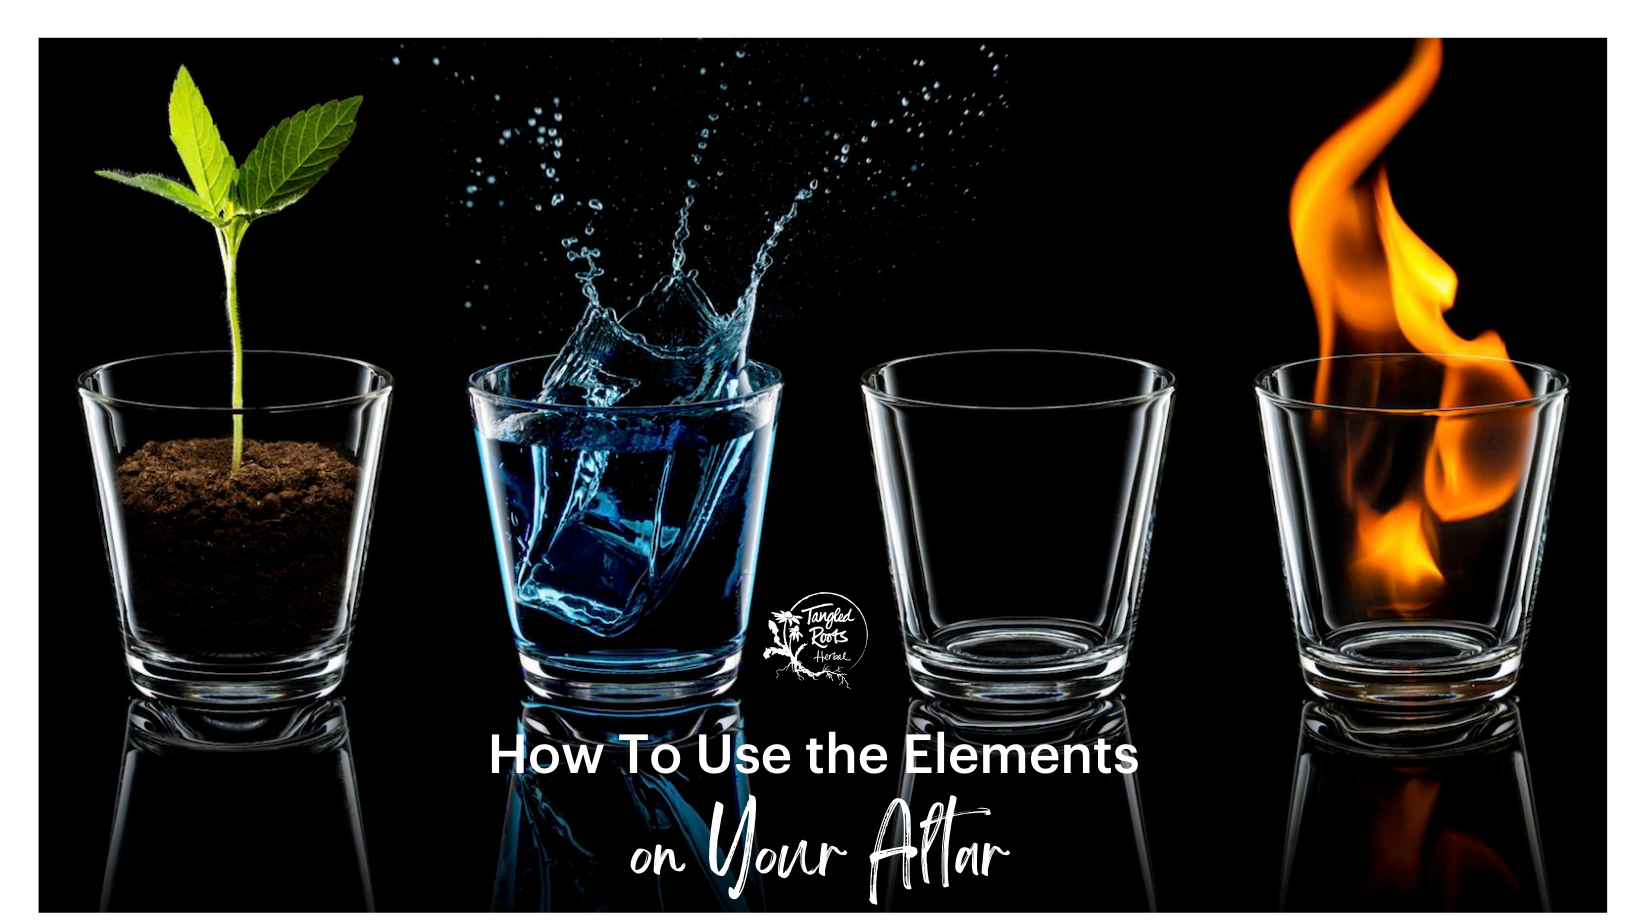 How to use the elements on your altar